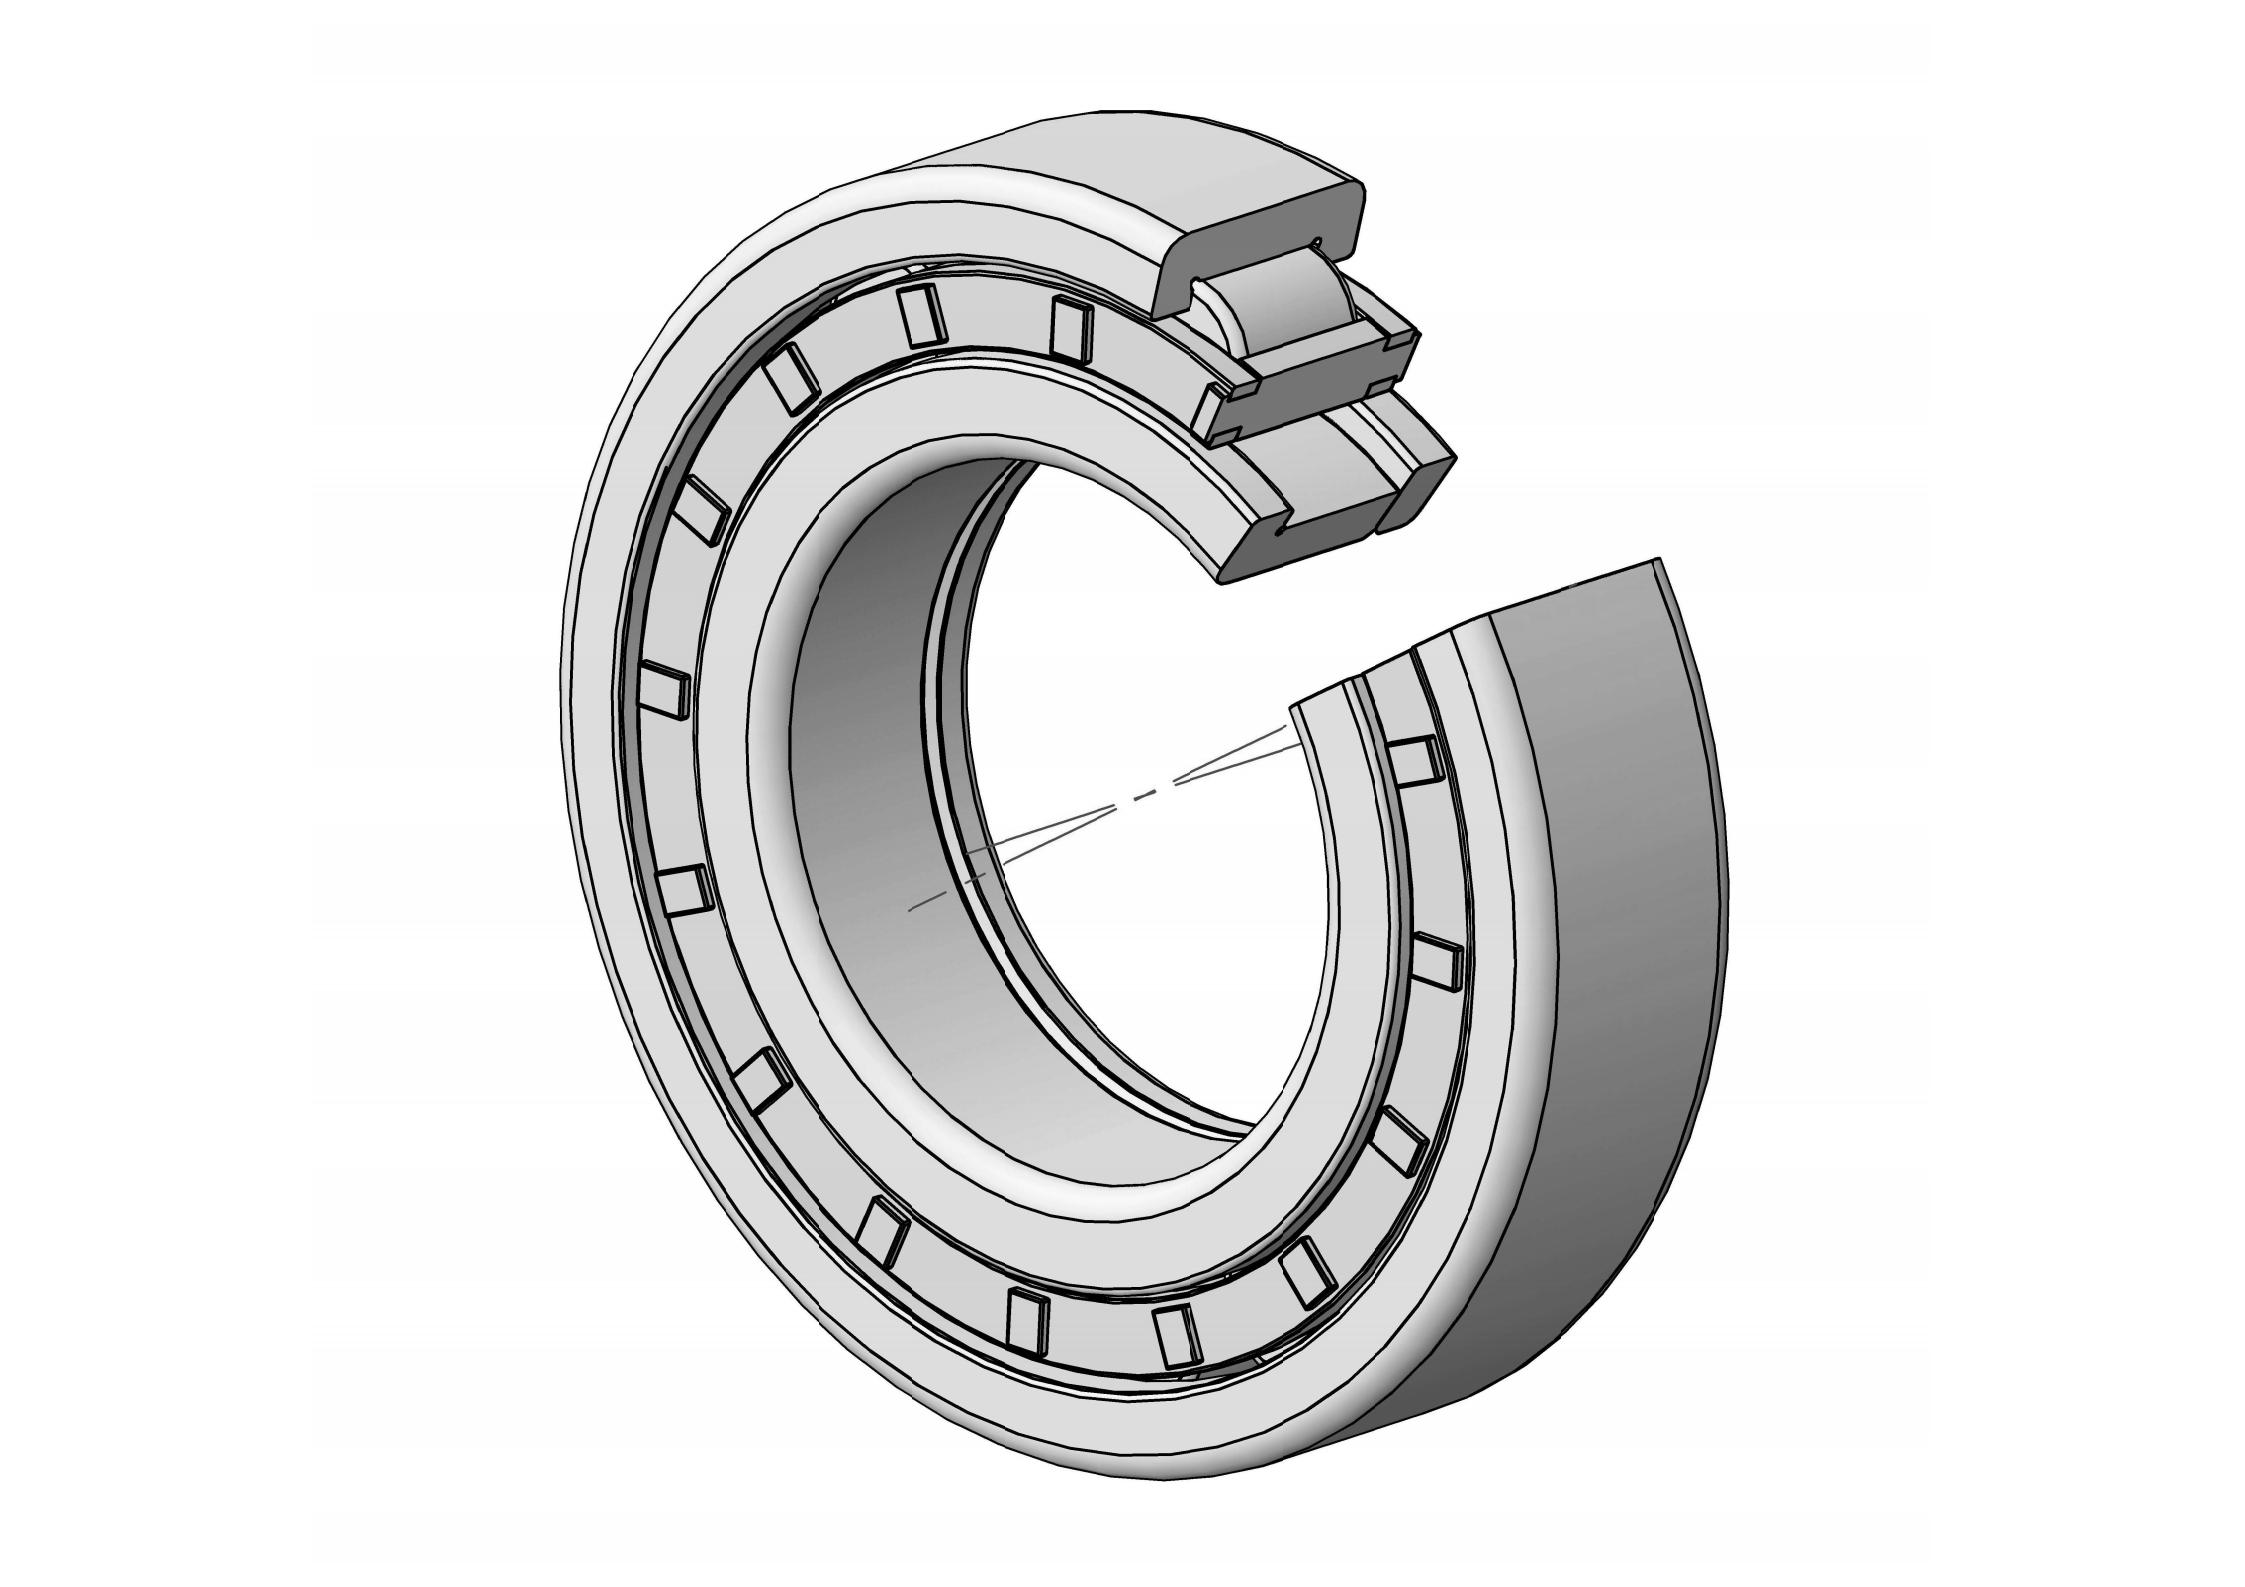 NUP2204-E Single Row Cylindrical roller bearing 